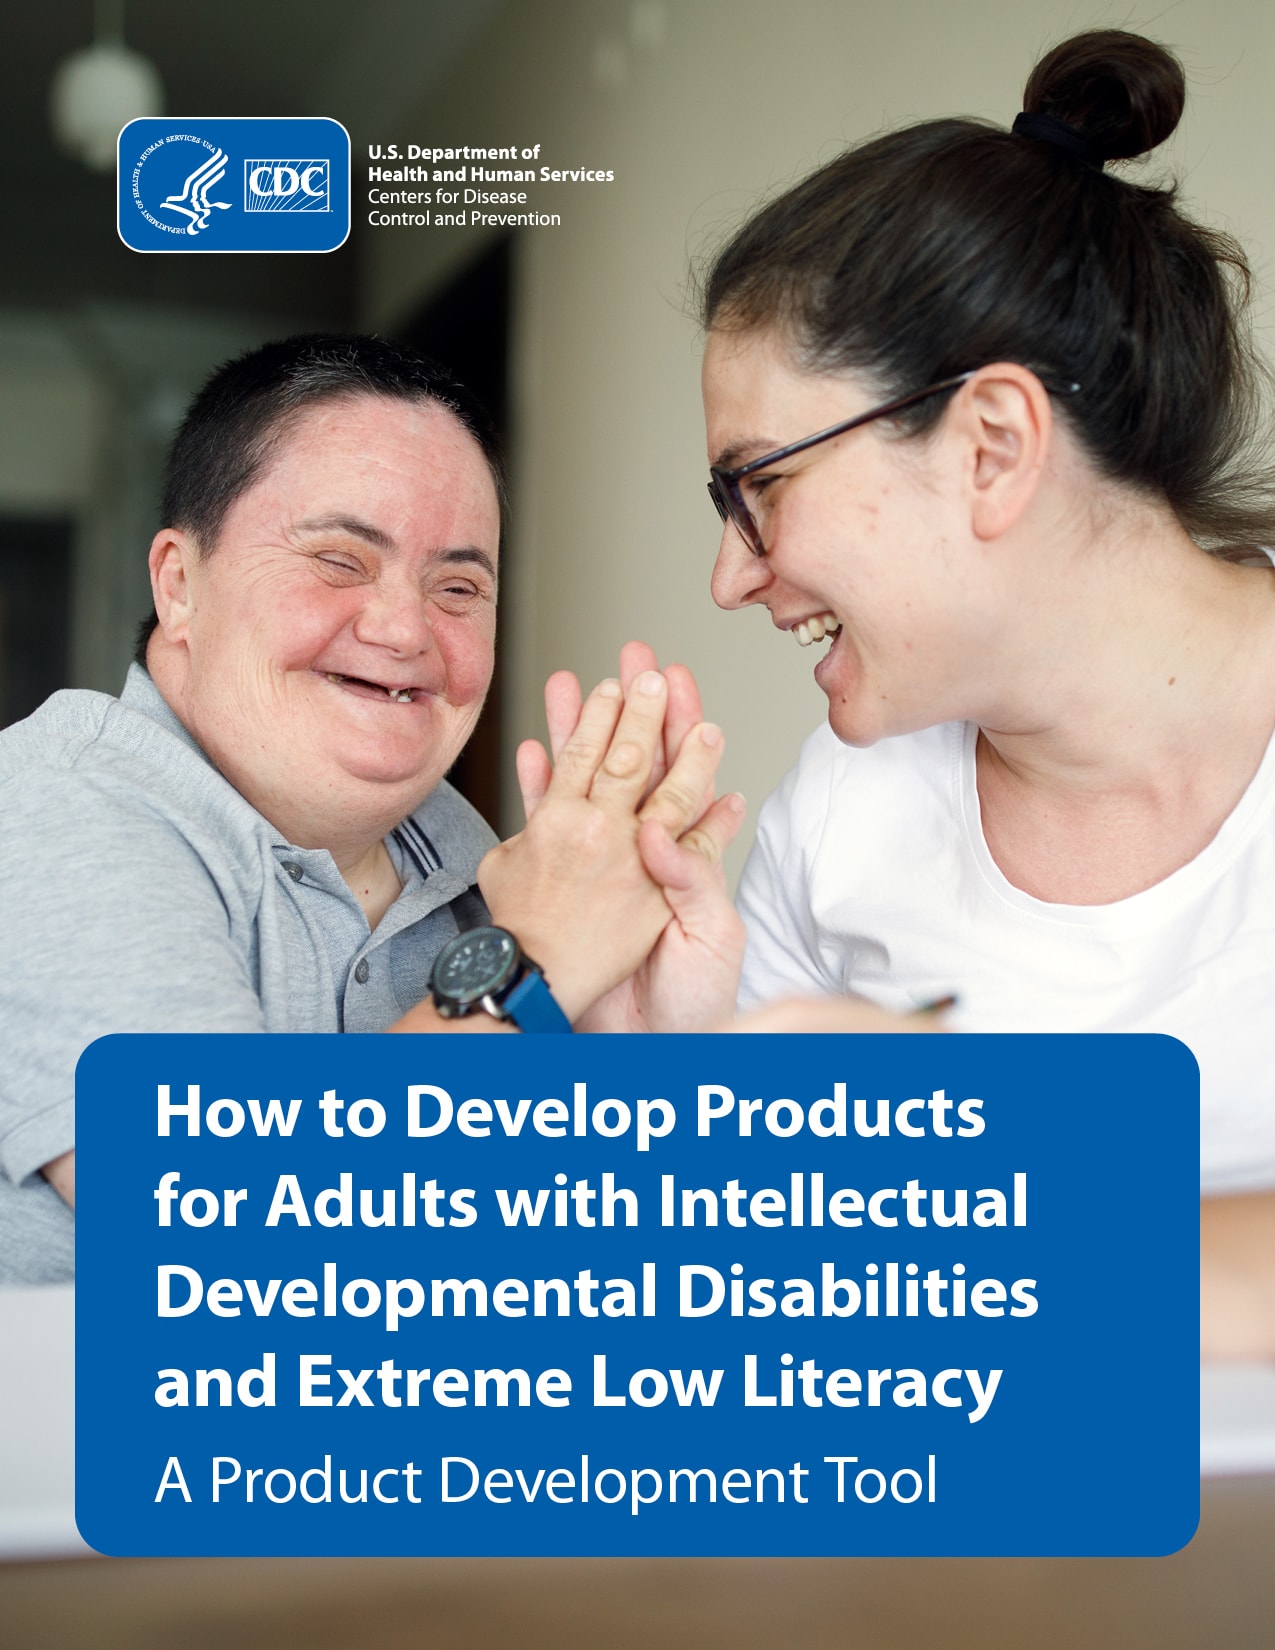 Front cover of How to Develop Products for Adults with Intellectual Developmental Disabilities and Extreme Low Literacy with smiling people clasping hands